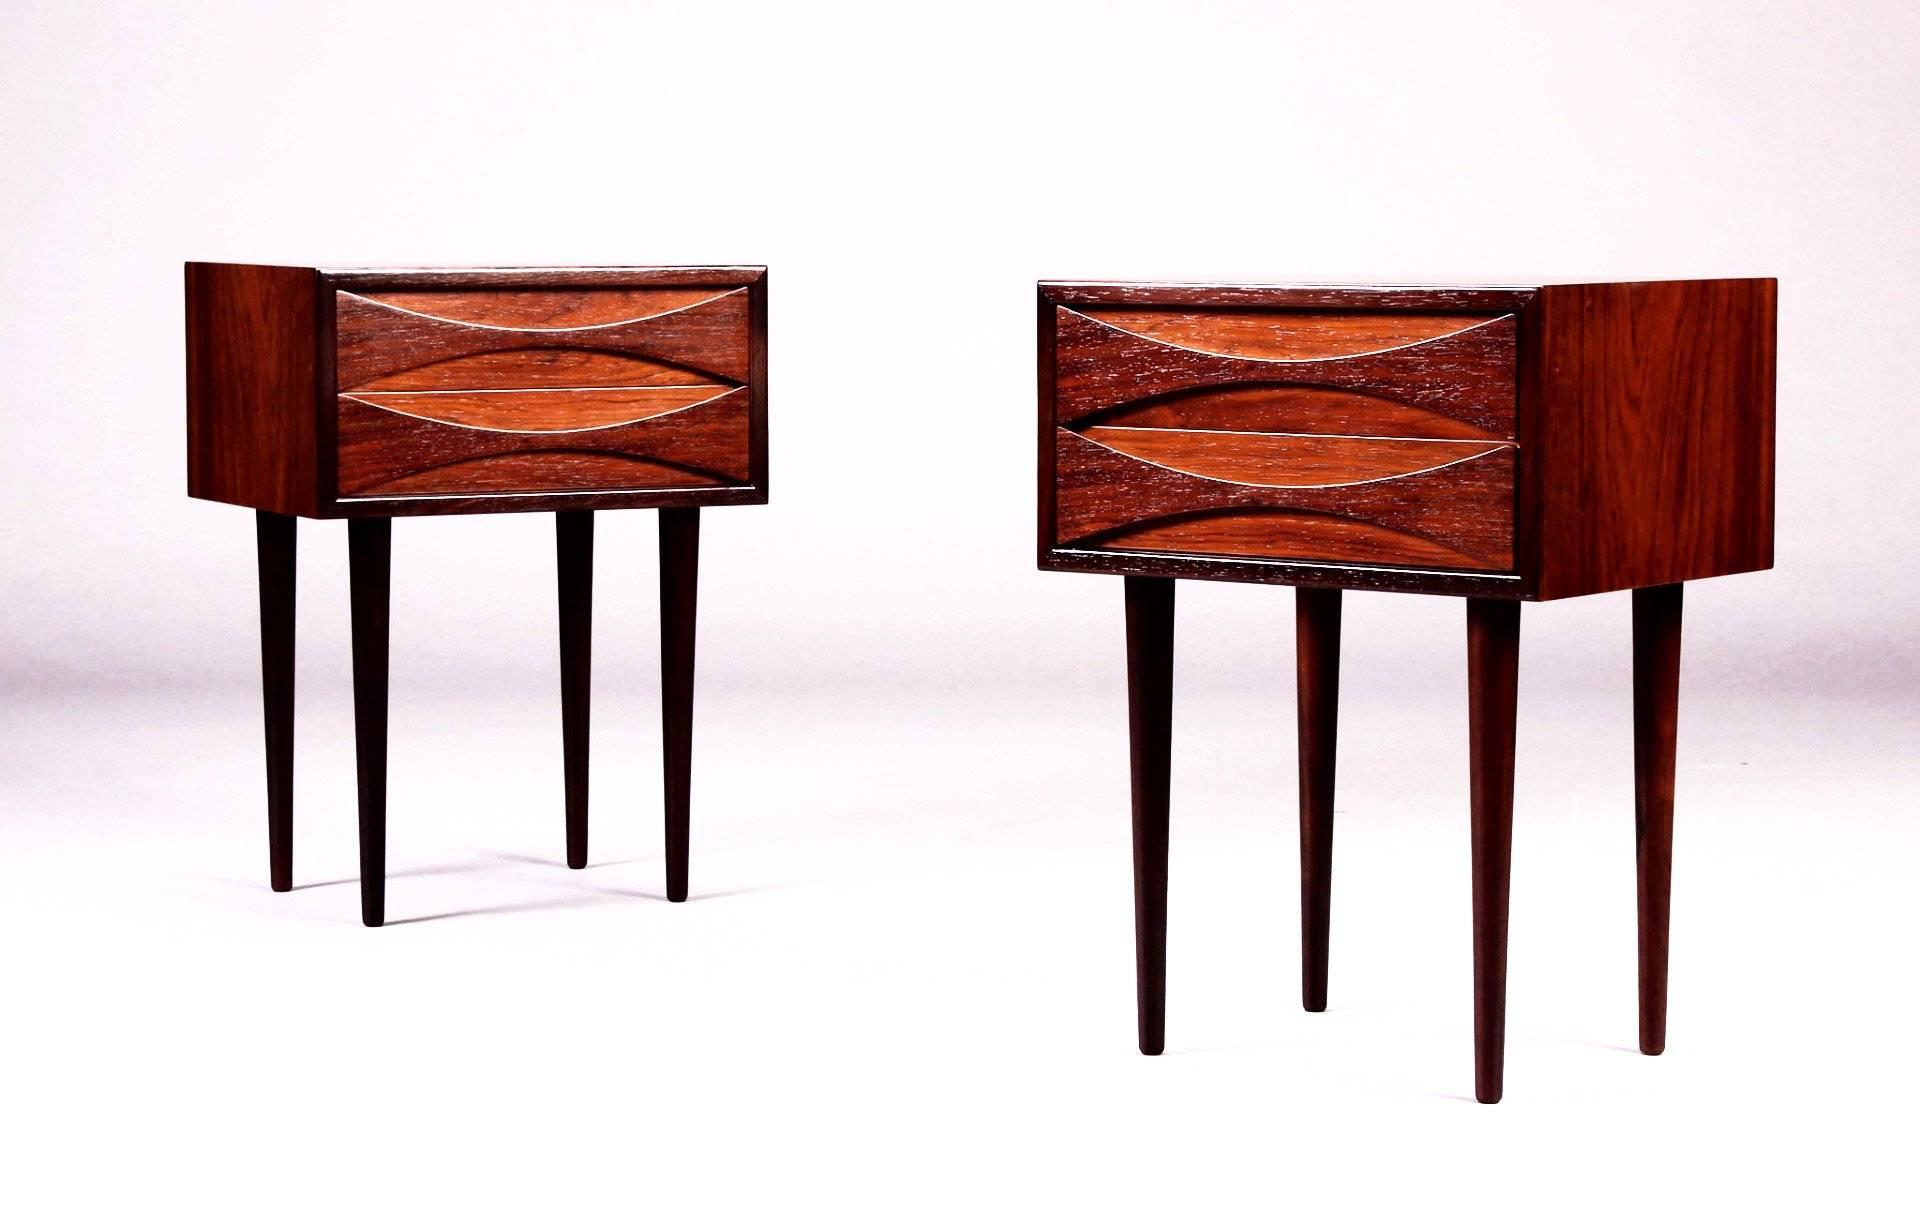 A pair of tall rosewood nightstands with slender legs and two drawers each. They are designed by Arne Vodder and are in excellent condition.

Arne Vodder is one of the most influential Scandinavian architects in the 20th century. His beautiful